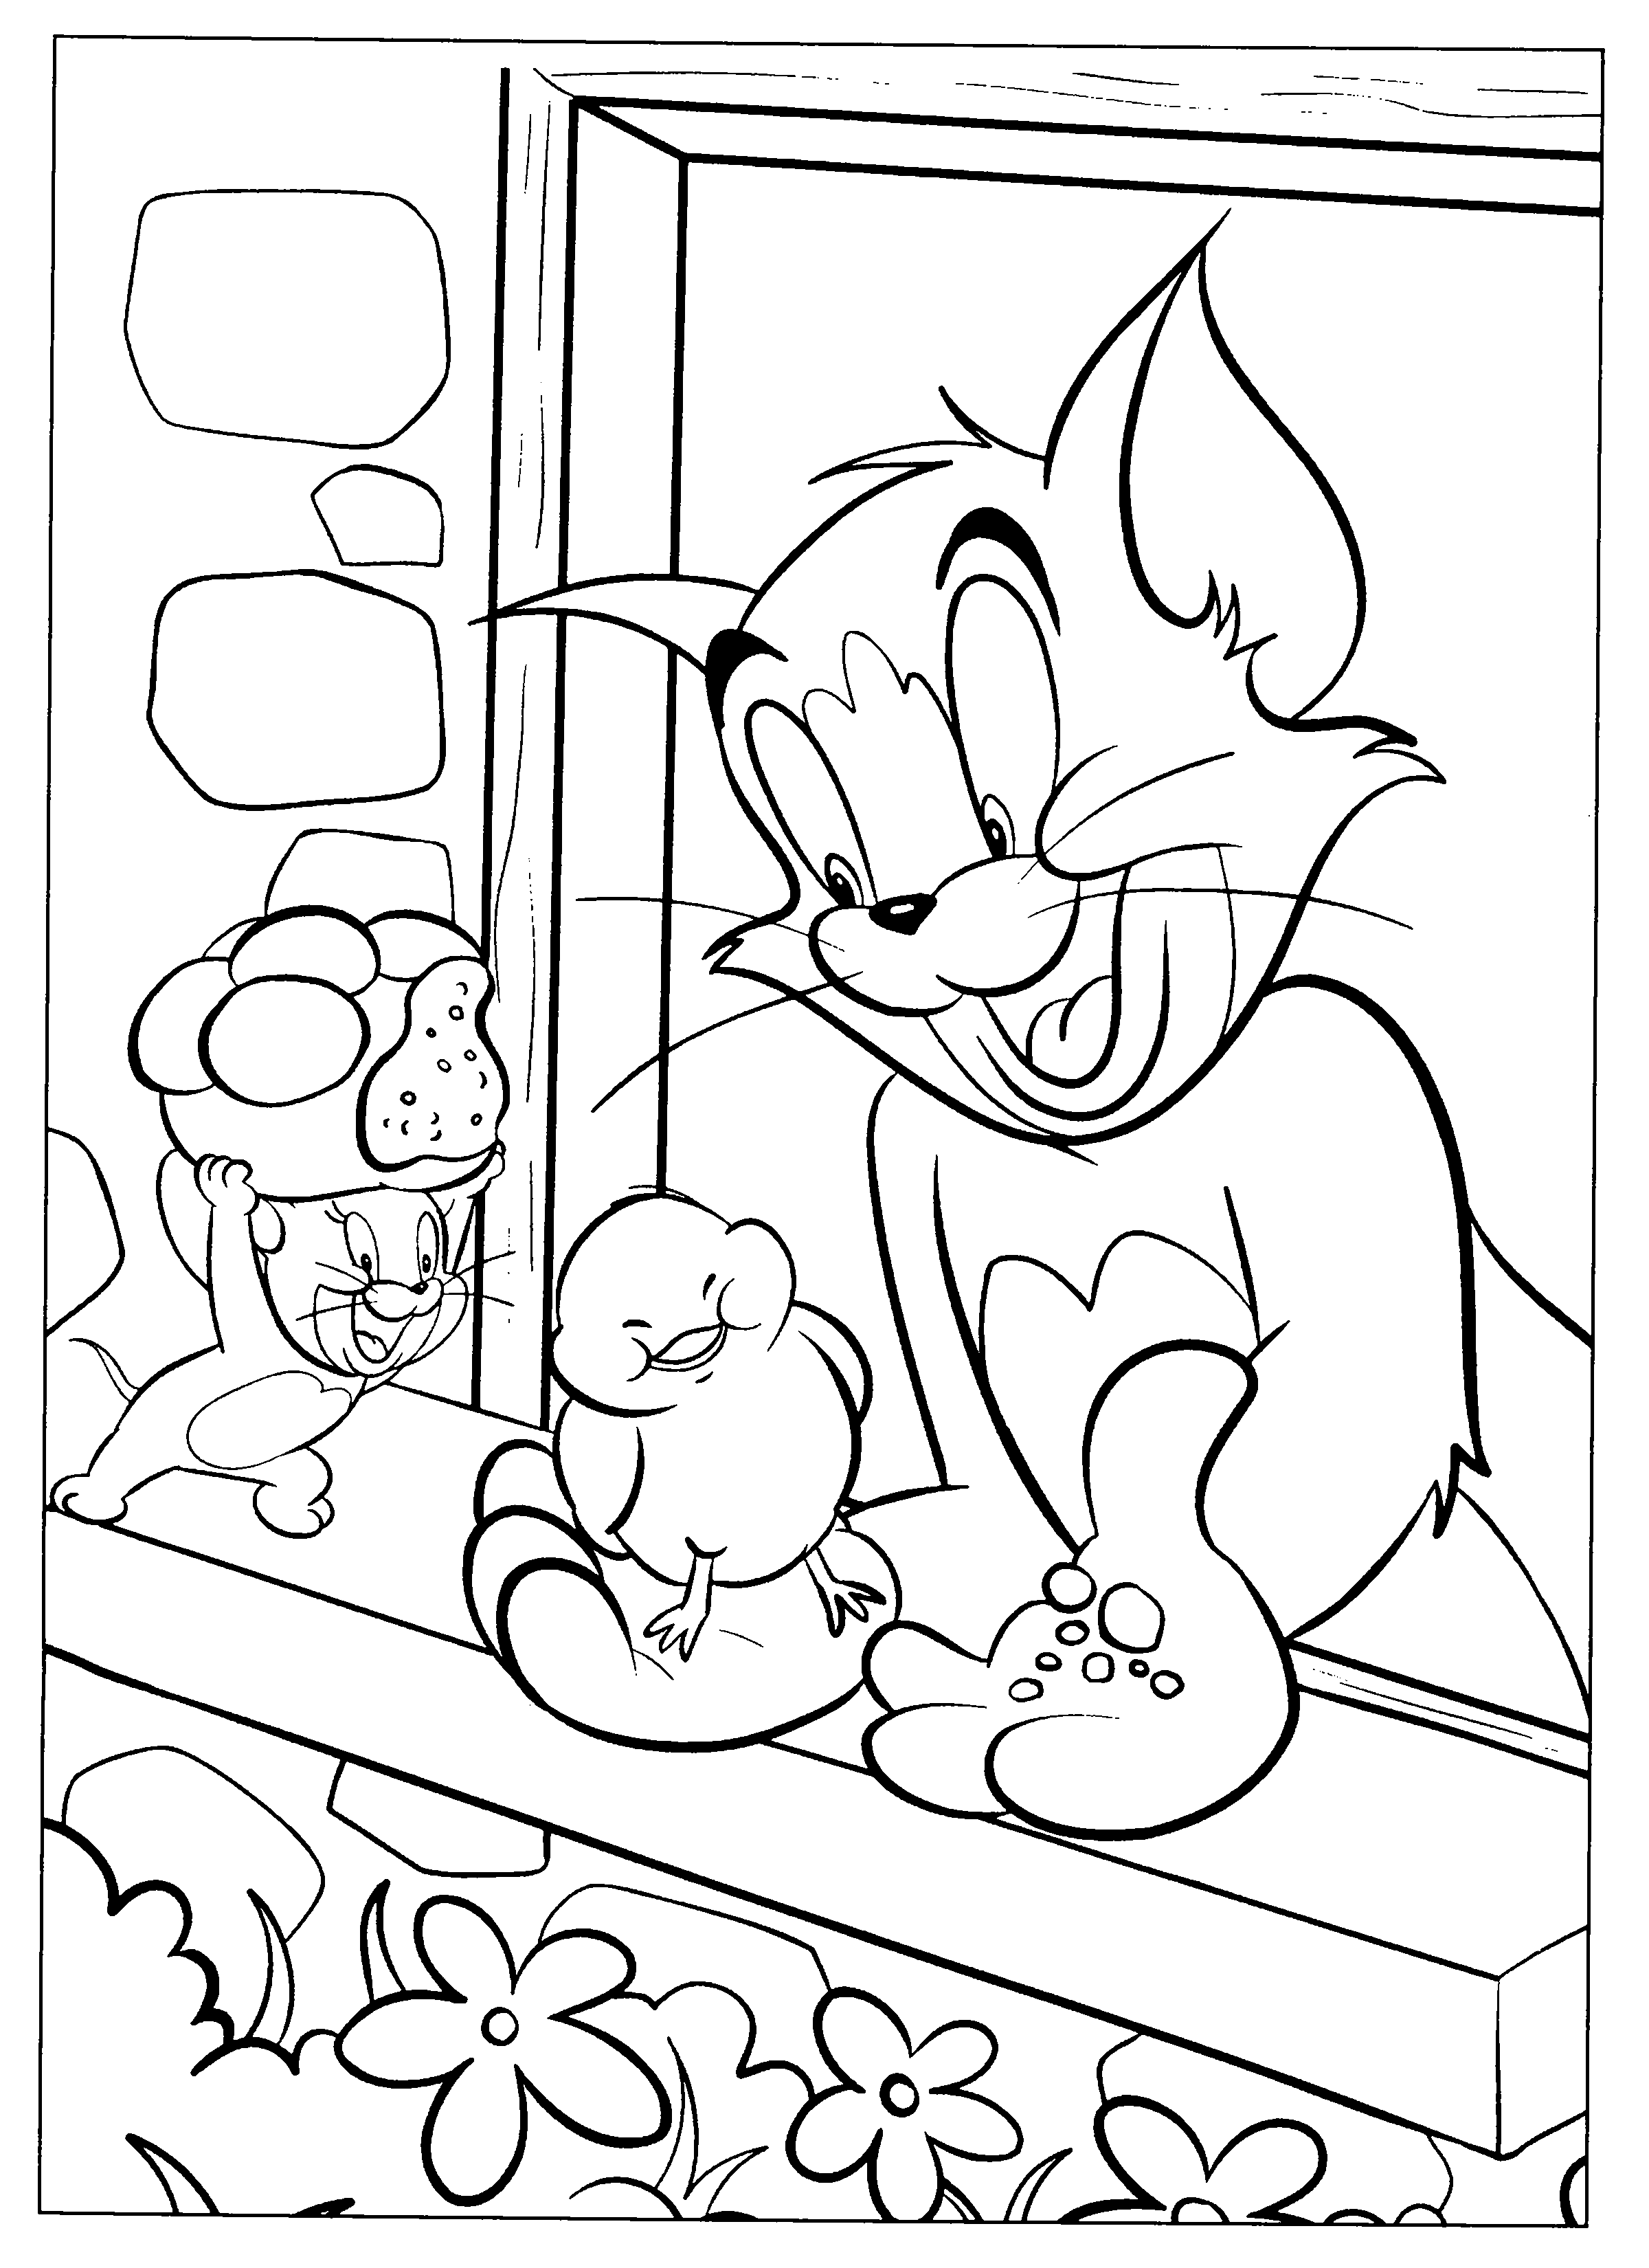 tom coloring pages talking tom coloring pages free printable coloring pages coloring pages tom 